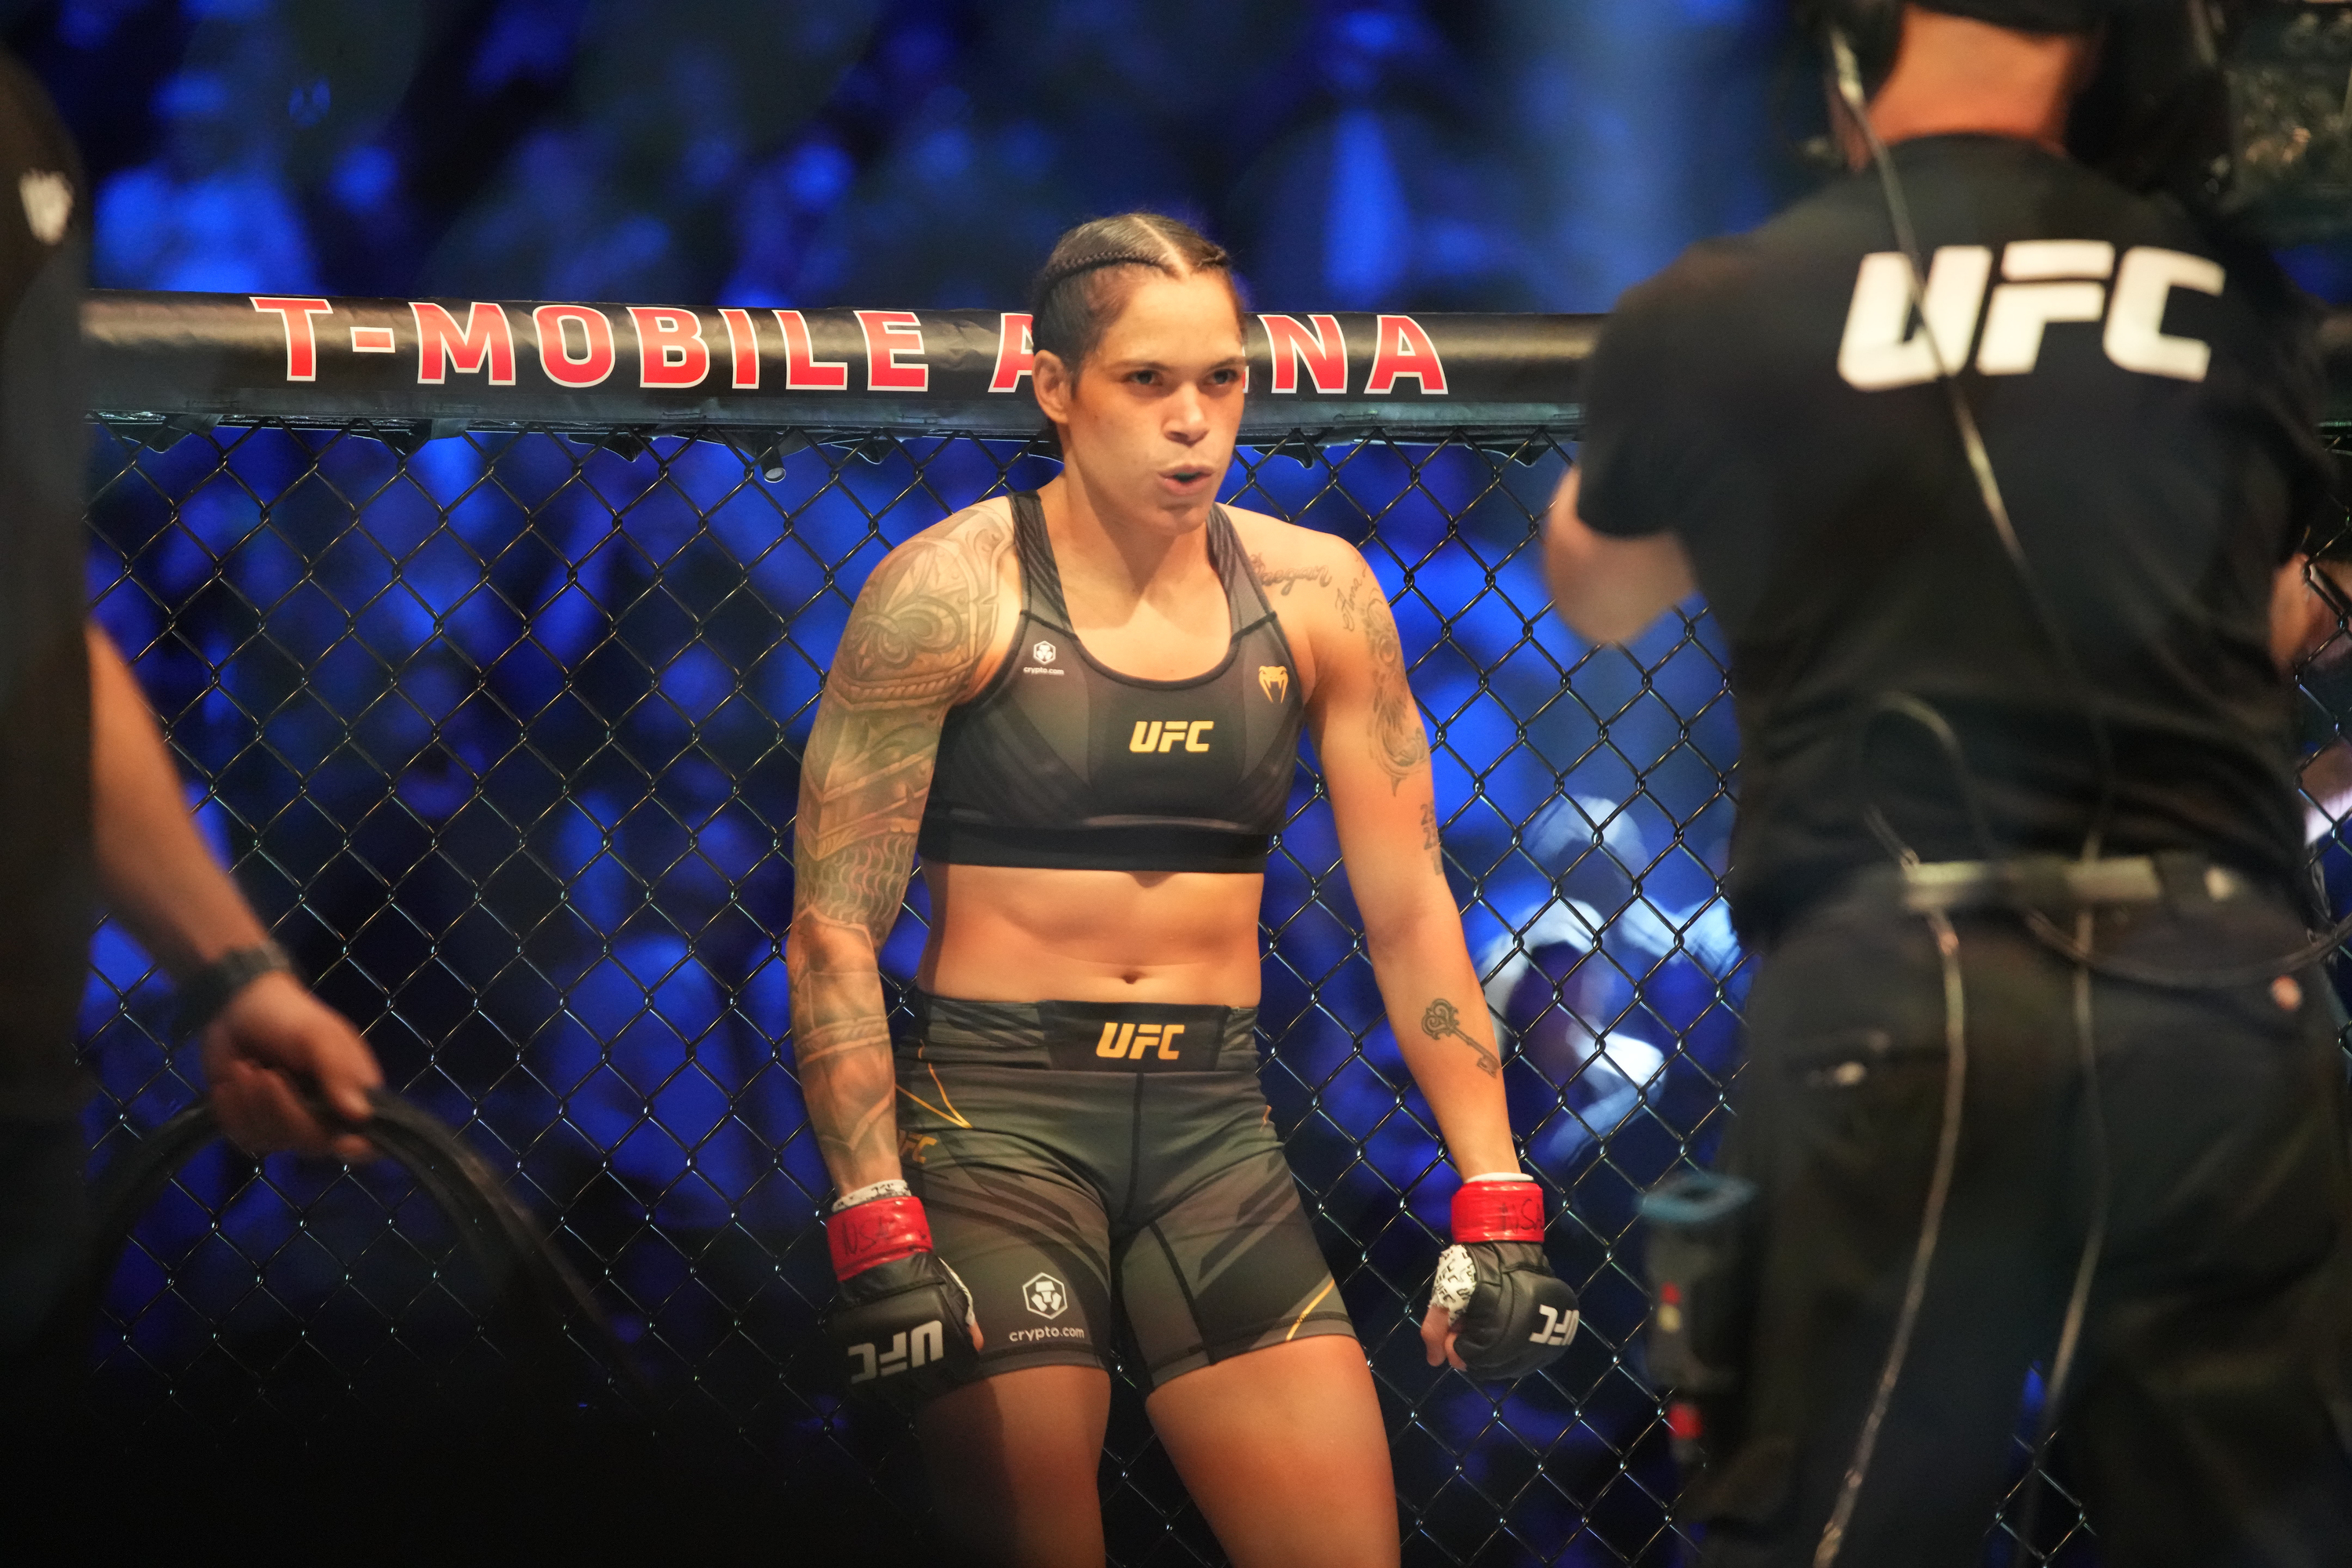 Amanda Nunes lost her bantamweight title to Julianna Pena in her last outing.